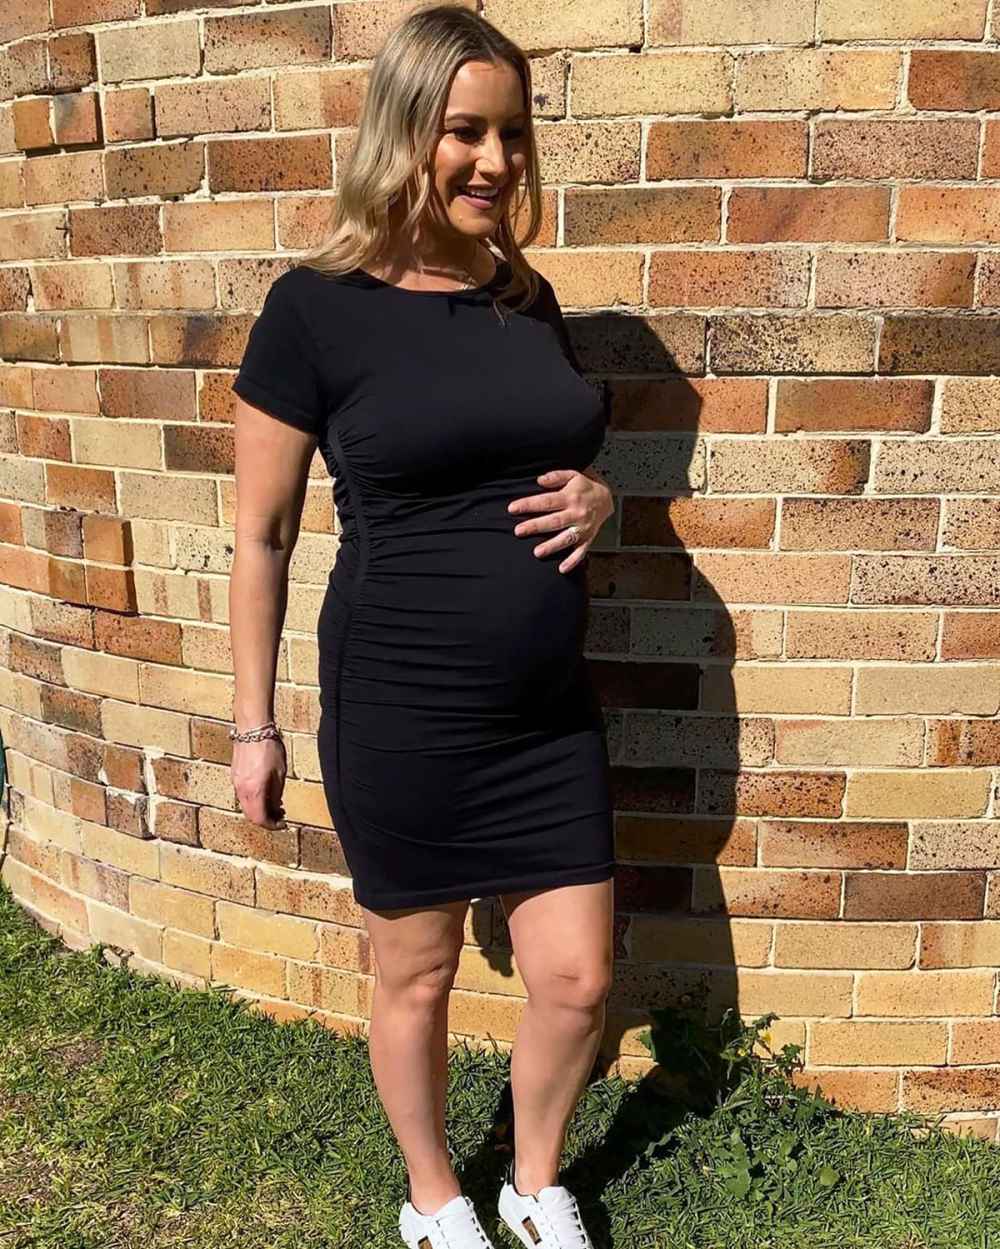 Pregnant Hannah Ferrier Slams Troll Telling Her to ‘Retire From Yachting’ to Be ‘Full-Time Mother’